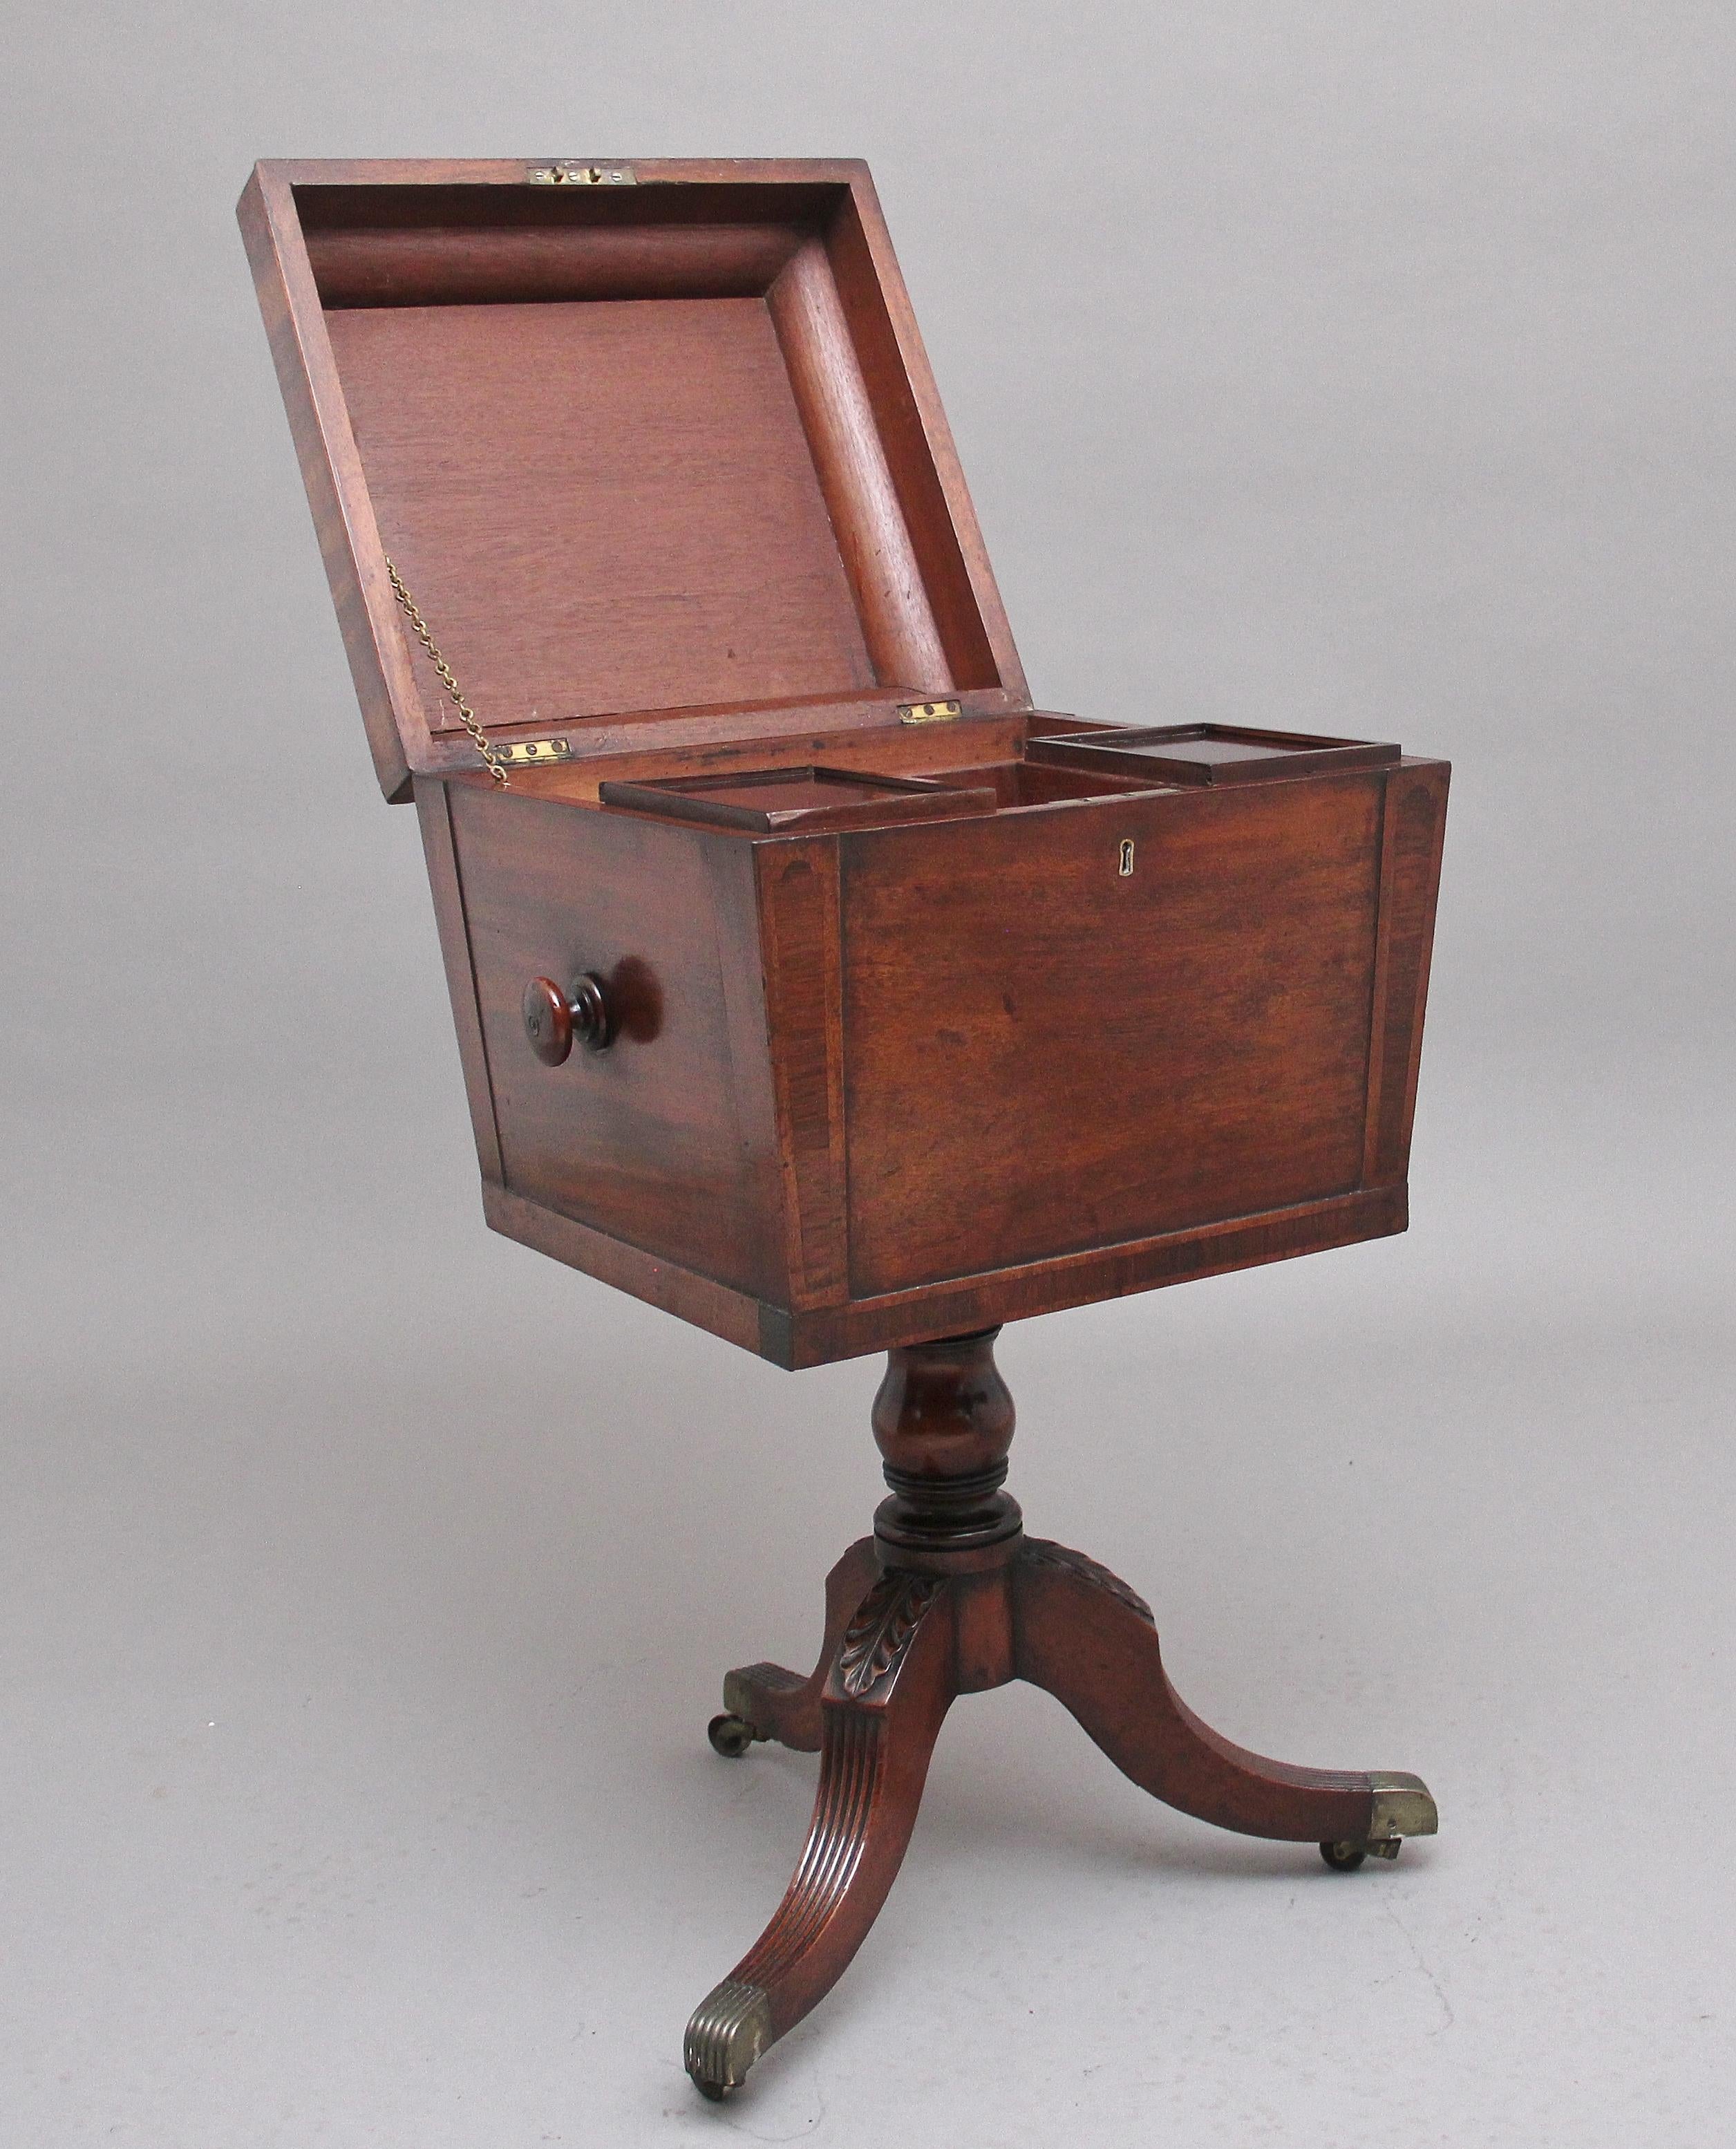 Early 19th century mahogany teapoy, the shaped, crossbanded and hinged top opening to reveal two wooden containers with lids, with two compartment spaces ideal for storage, the sides of the teapoy having turned wooden knob handles for carrying,